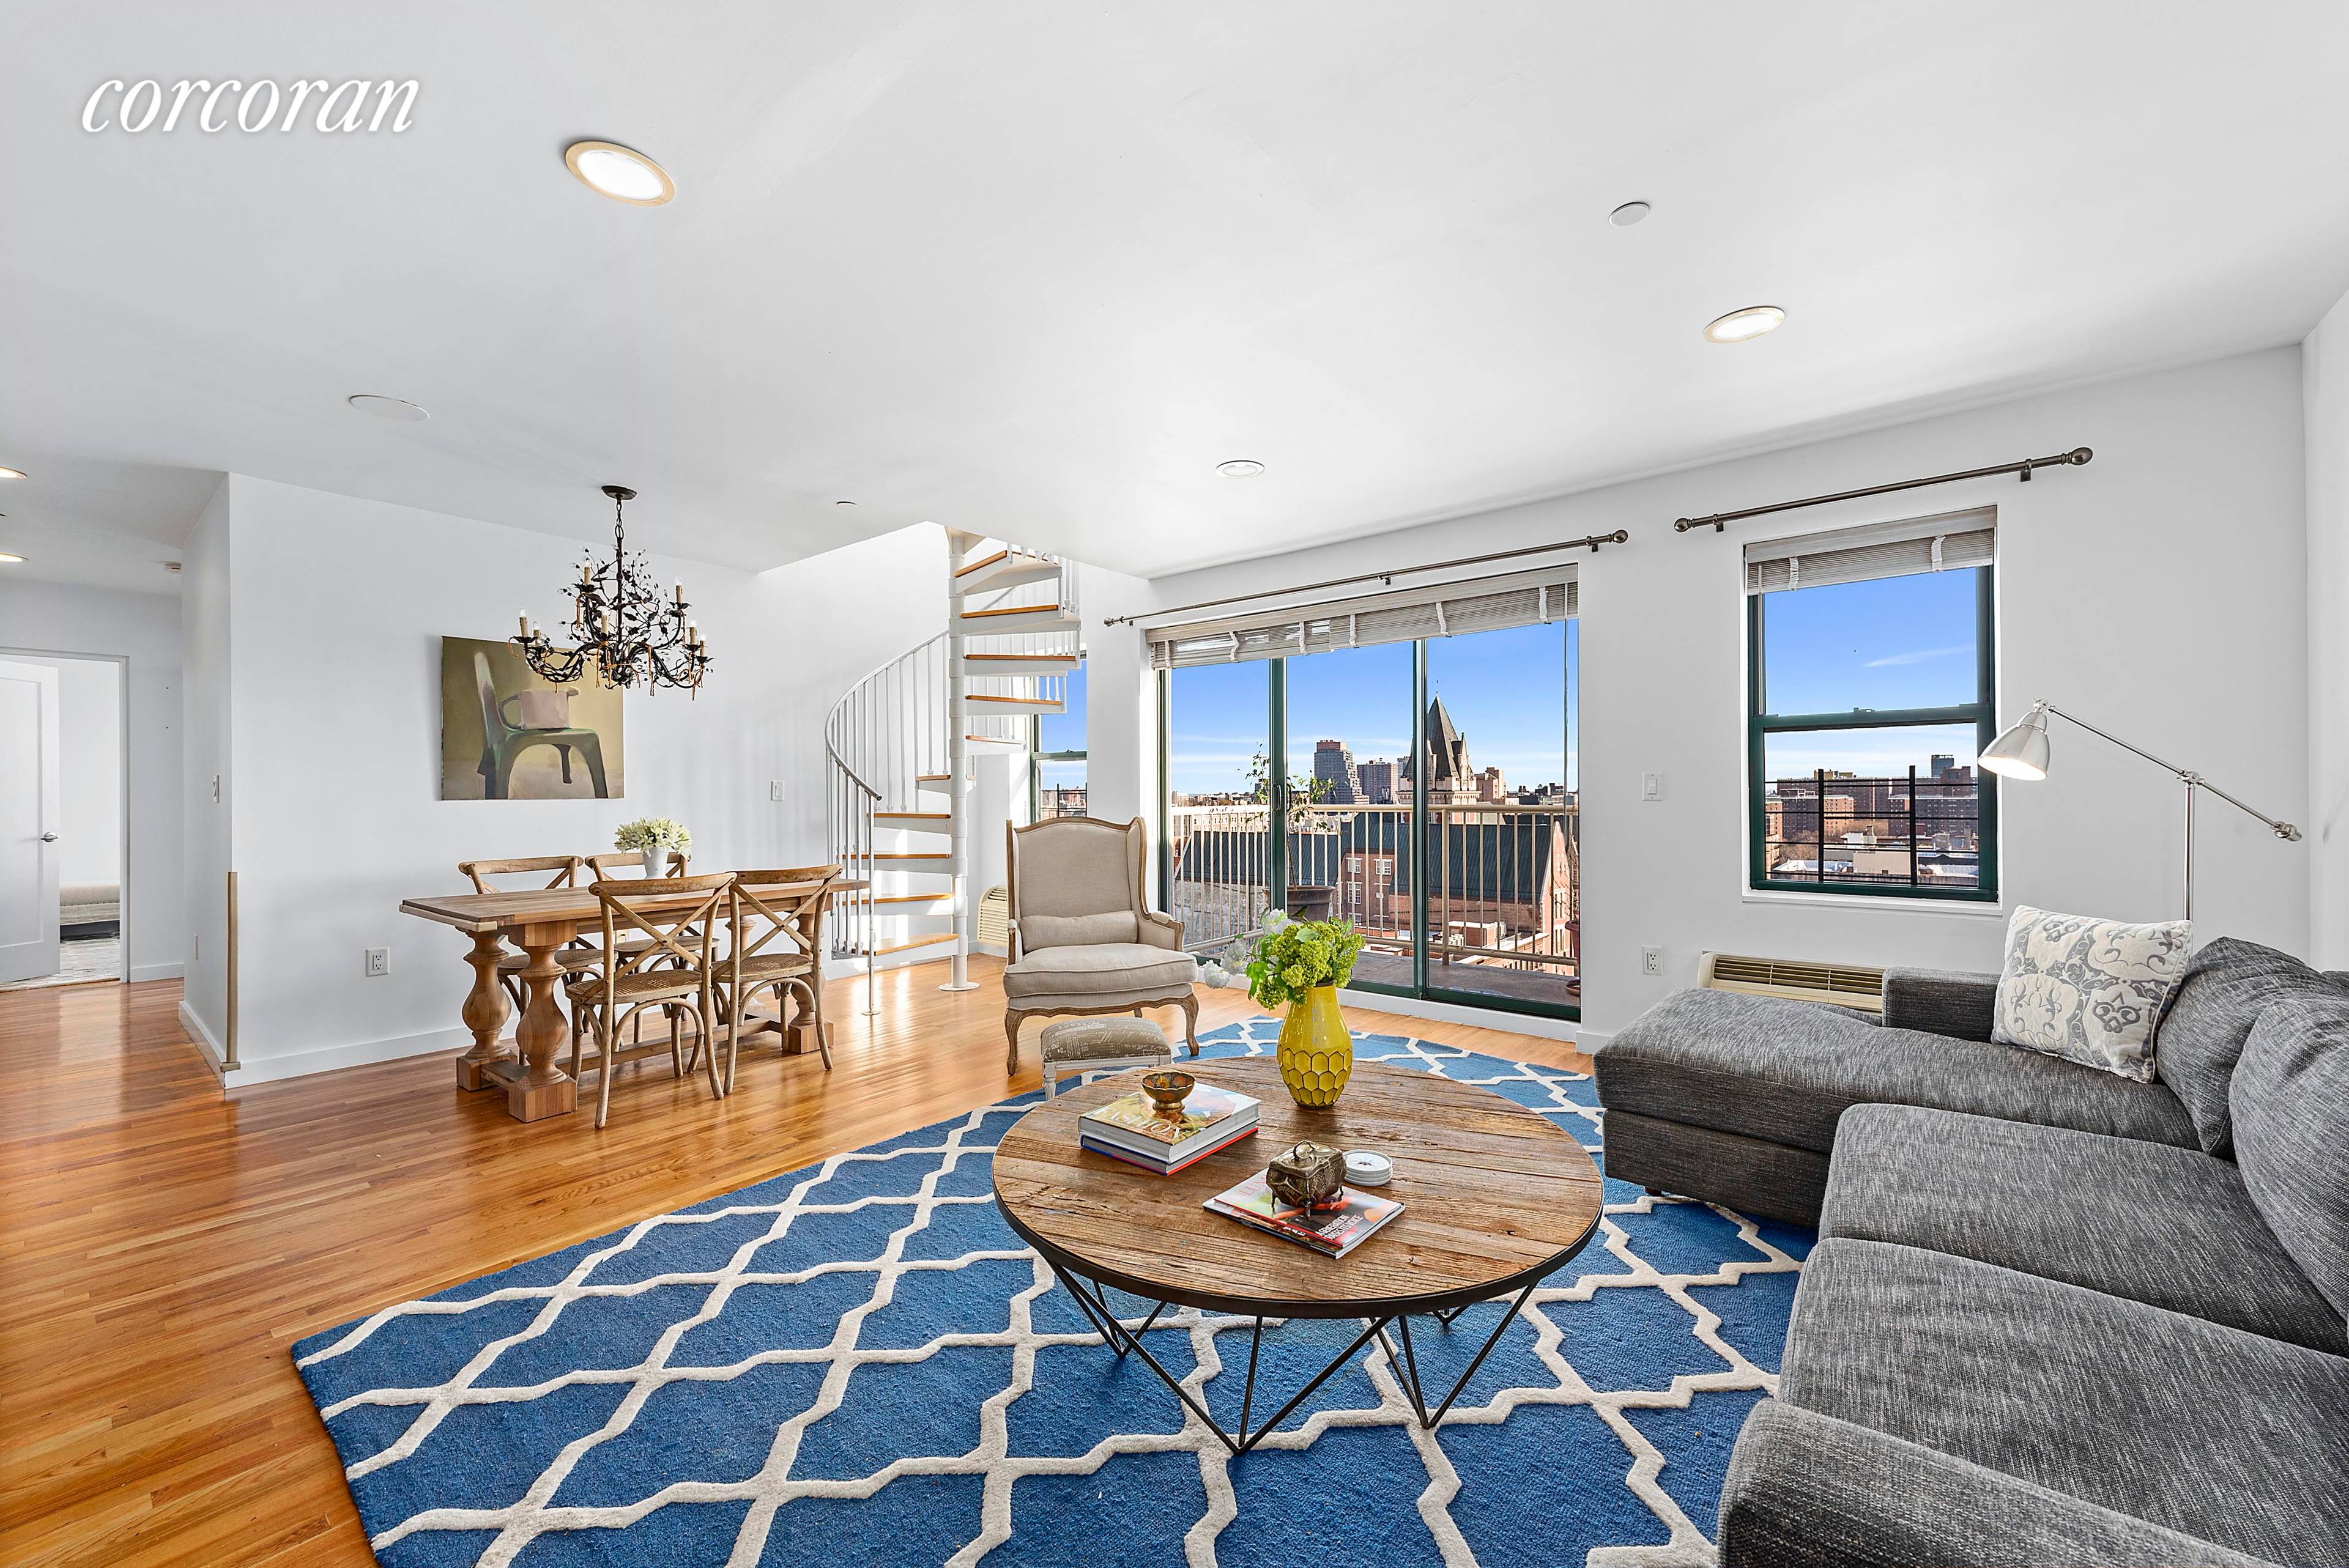 Welcome to this fantastic 2 bedroom 2 bathroom penthouse with an extraordinary private roof deck that has its own kitchen and amazing open views.